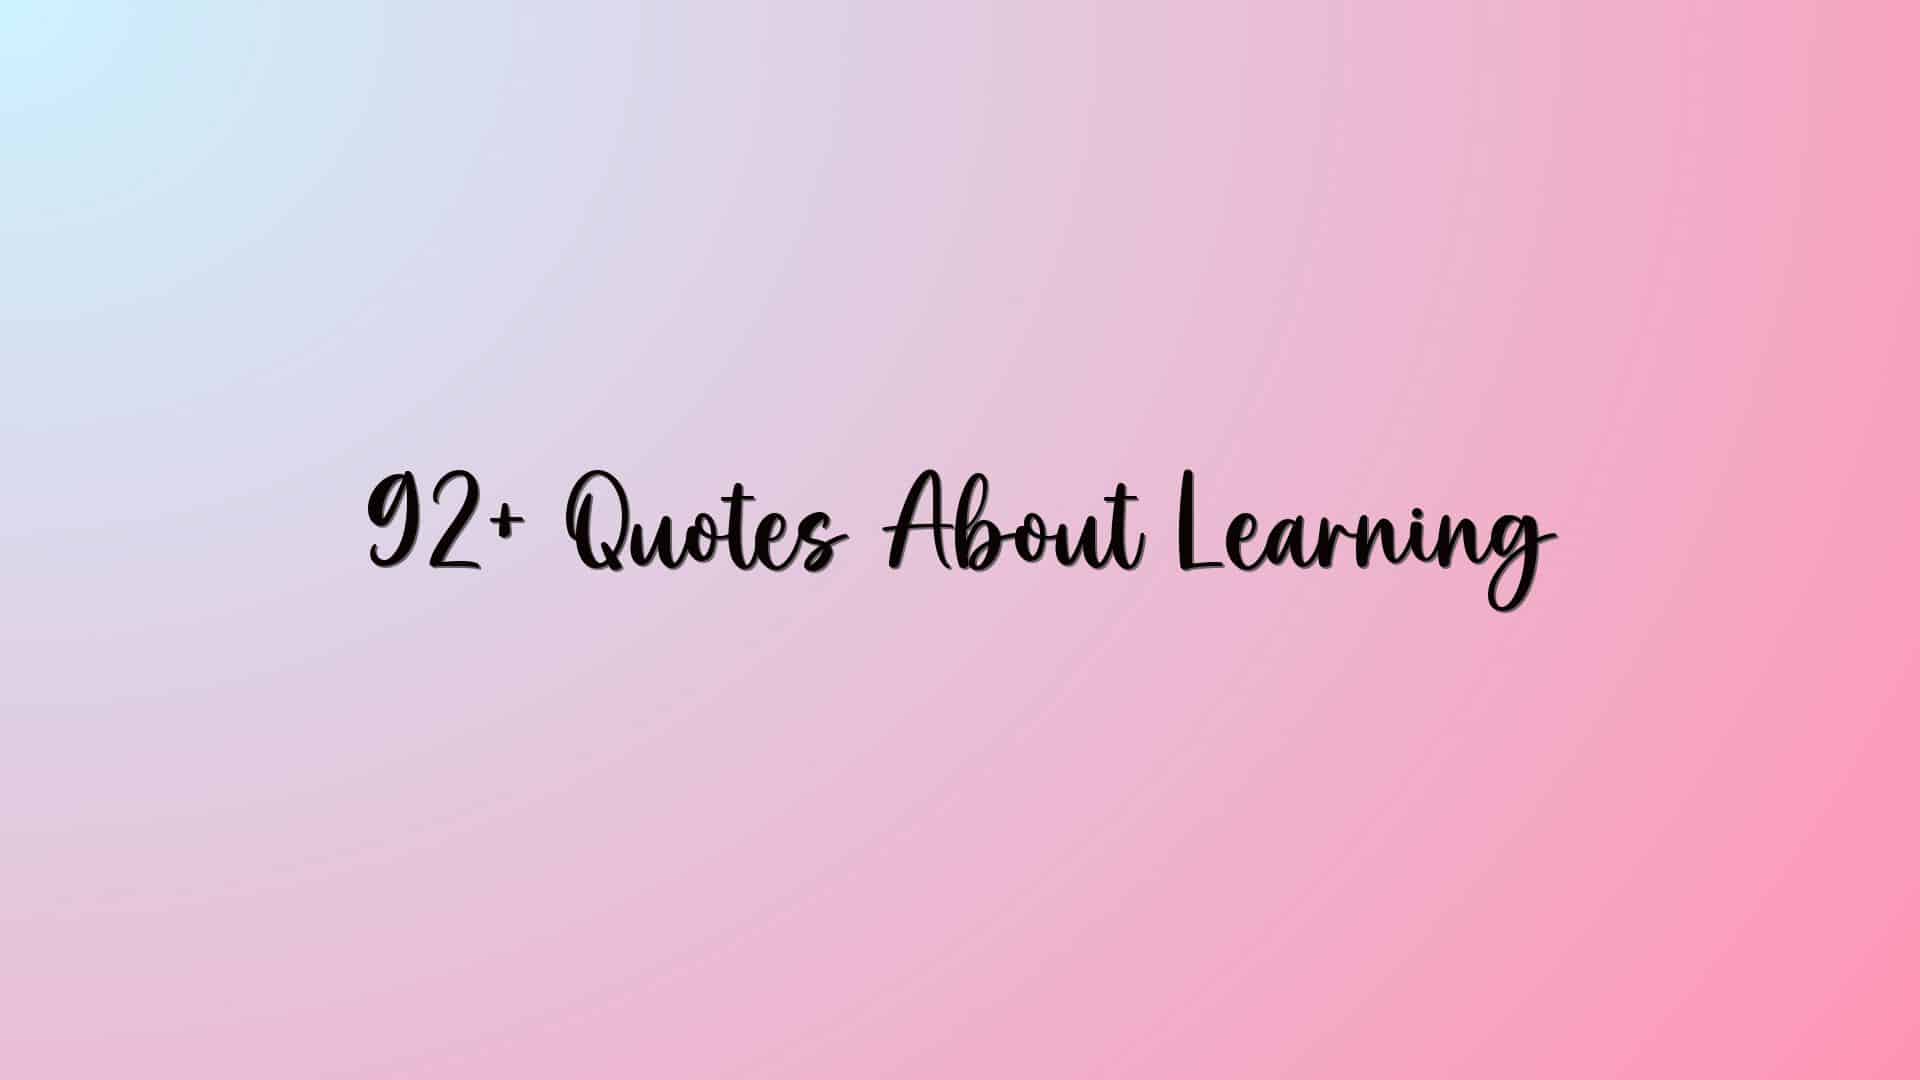 92+ Quotes About Learning